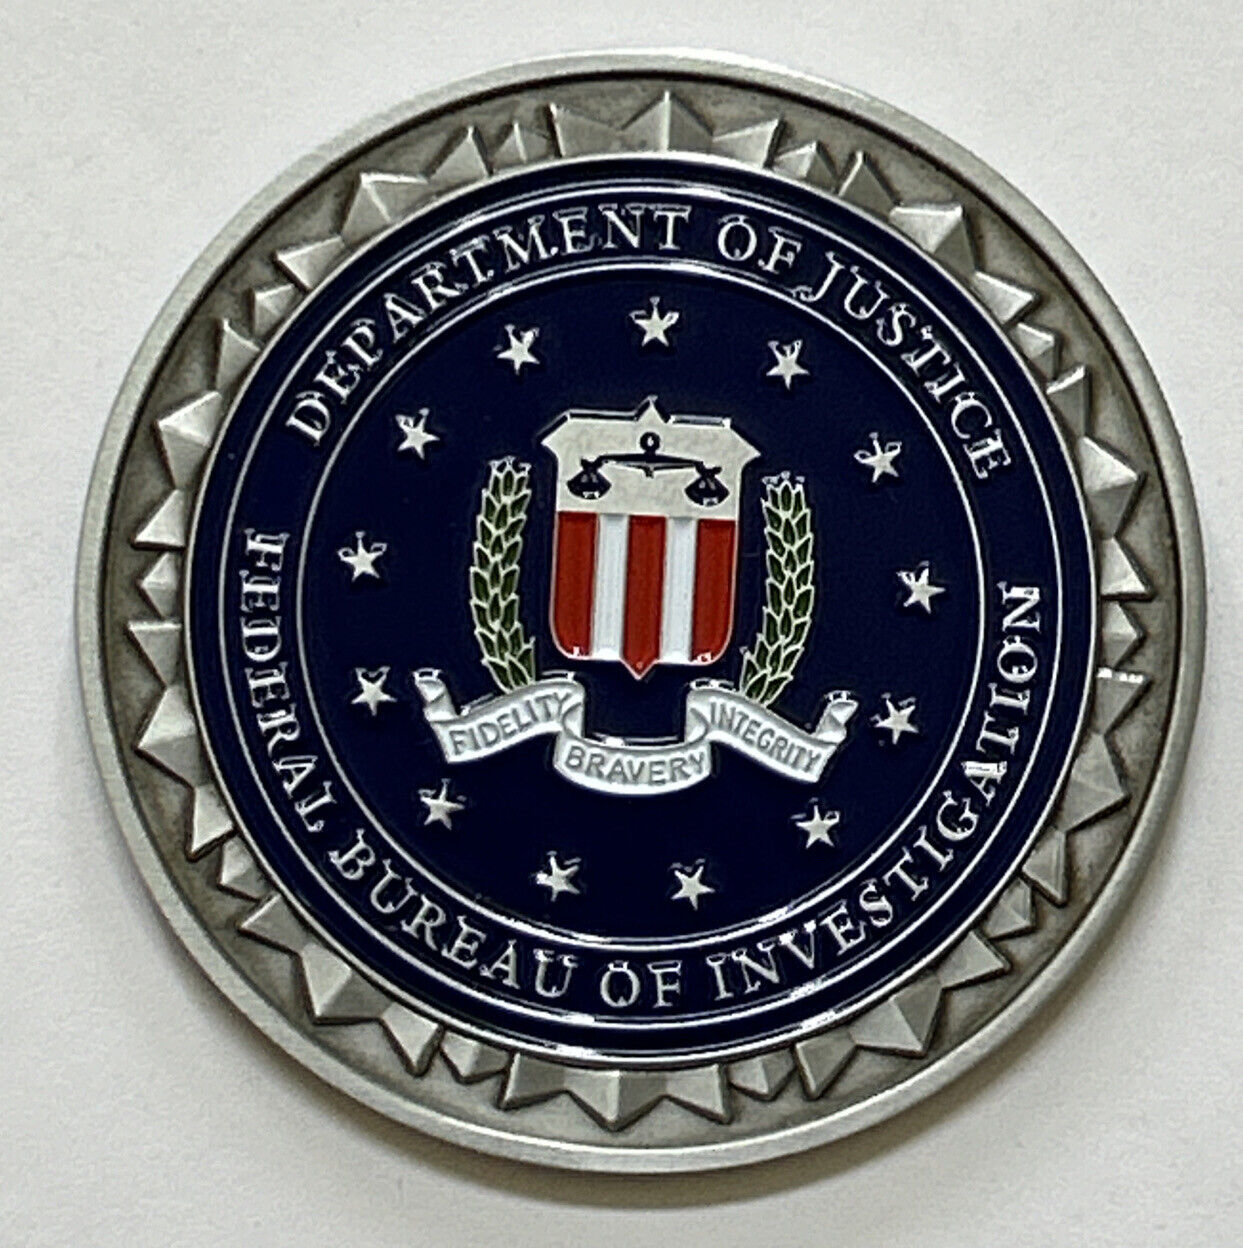 FBI Federal Bureau of Investigation Seal Paper Weight / Coaster / Challenge Coin